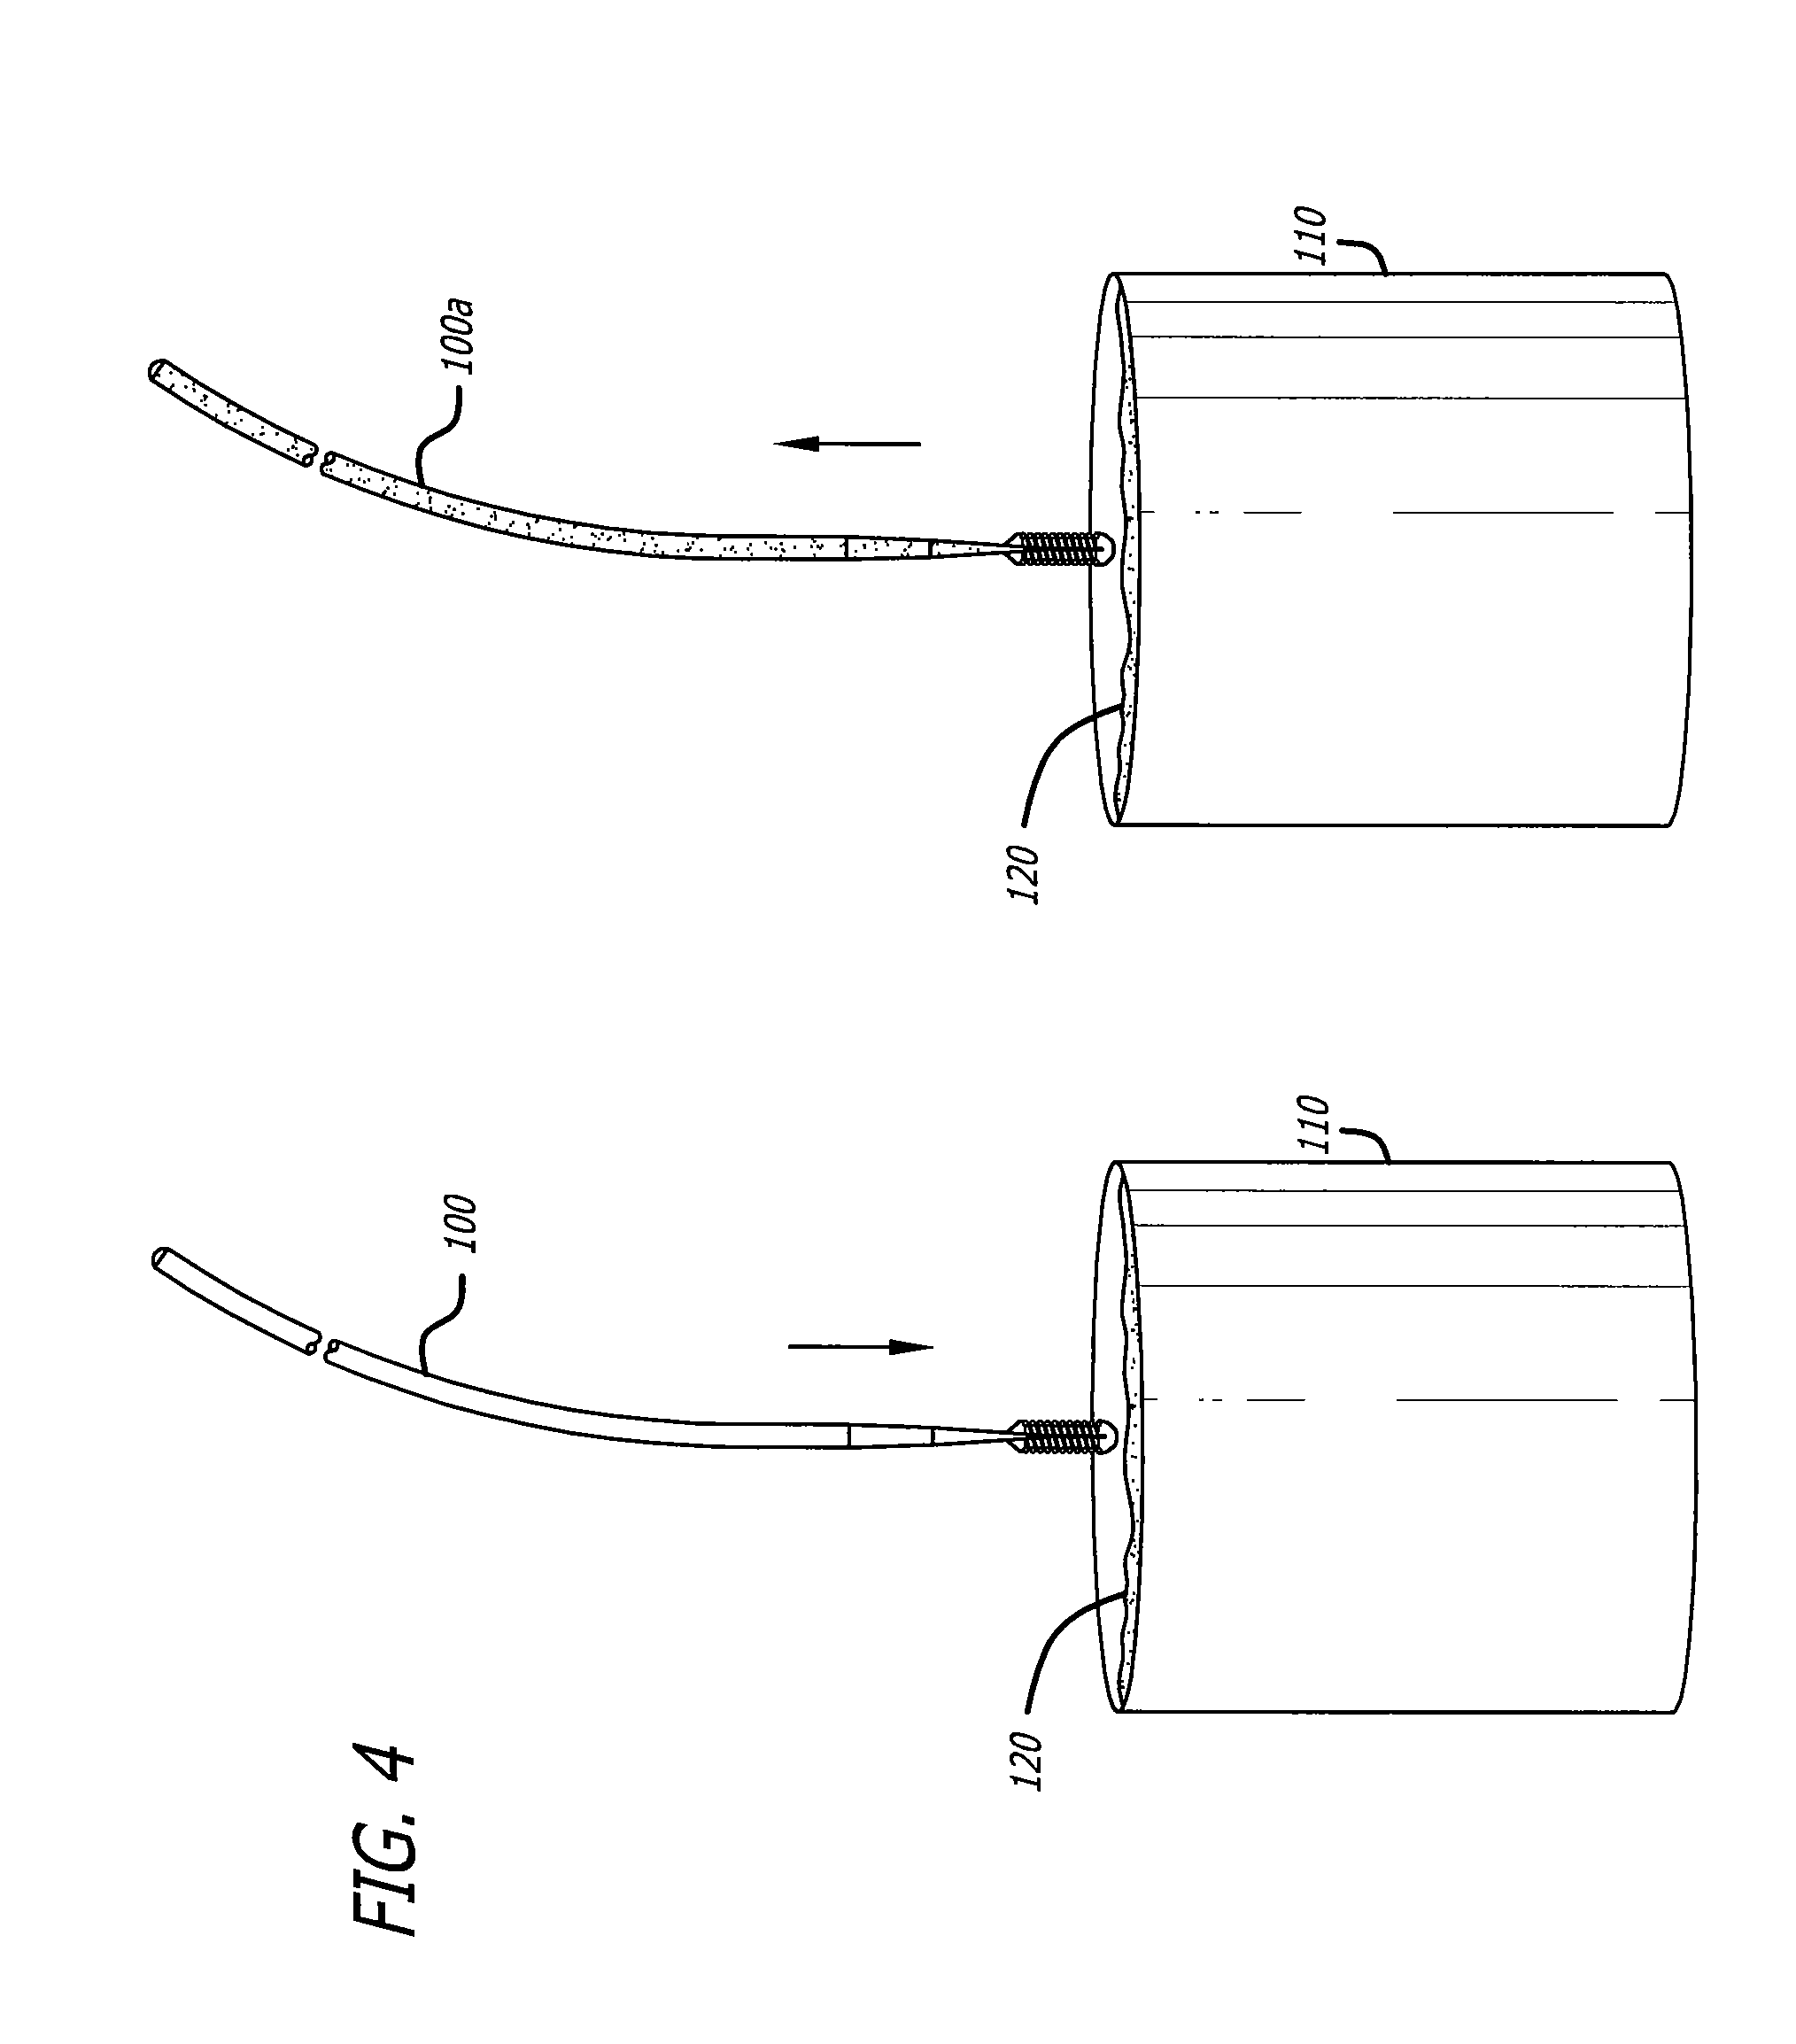 Color coded guide wire and methods of making same